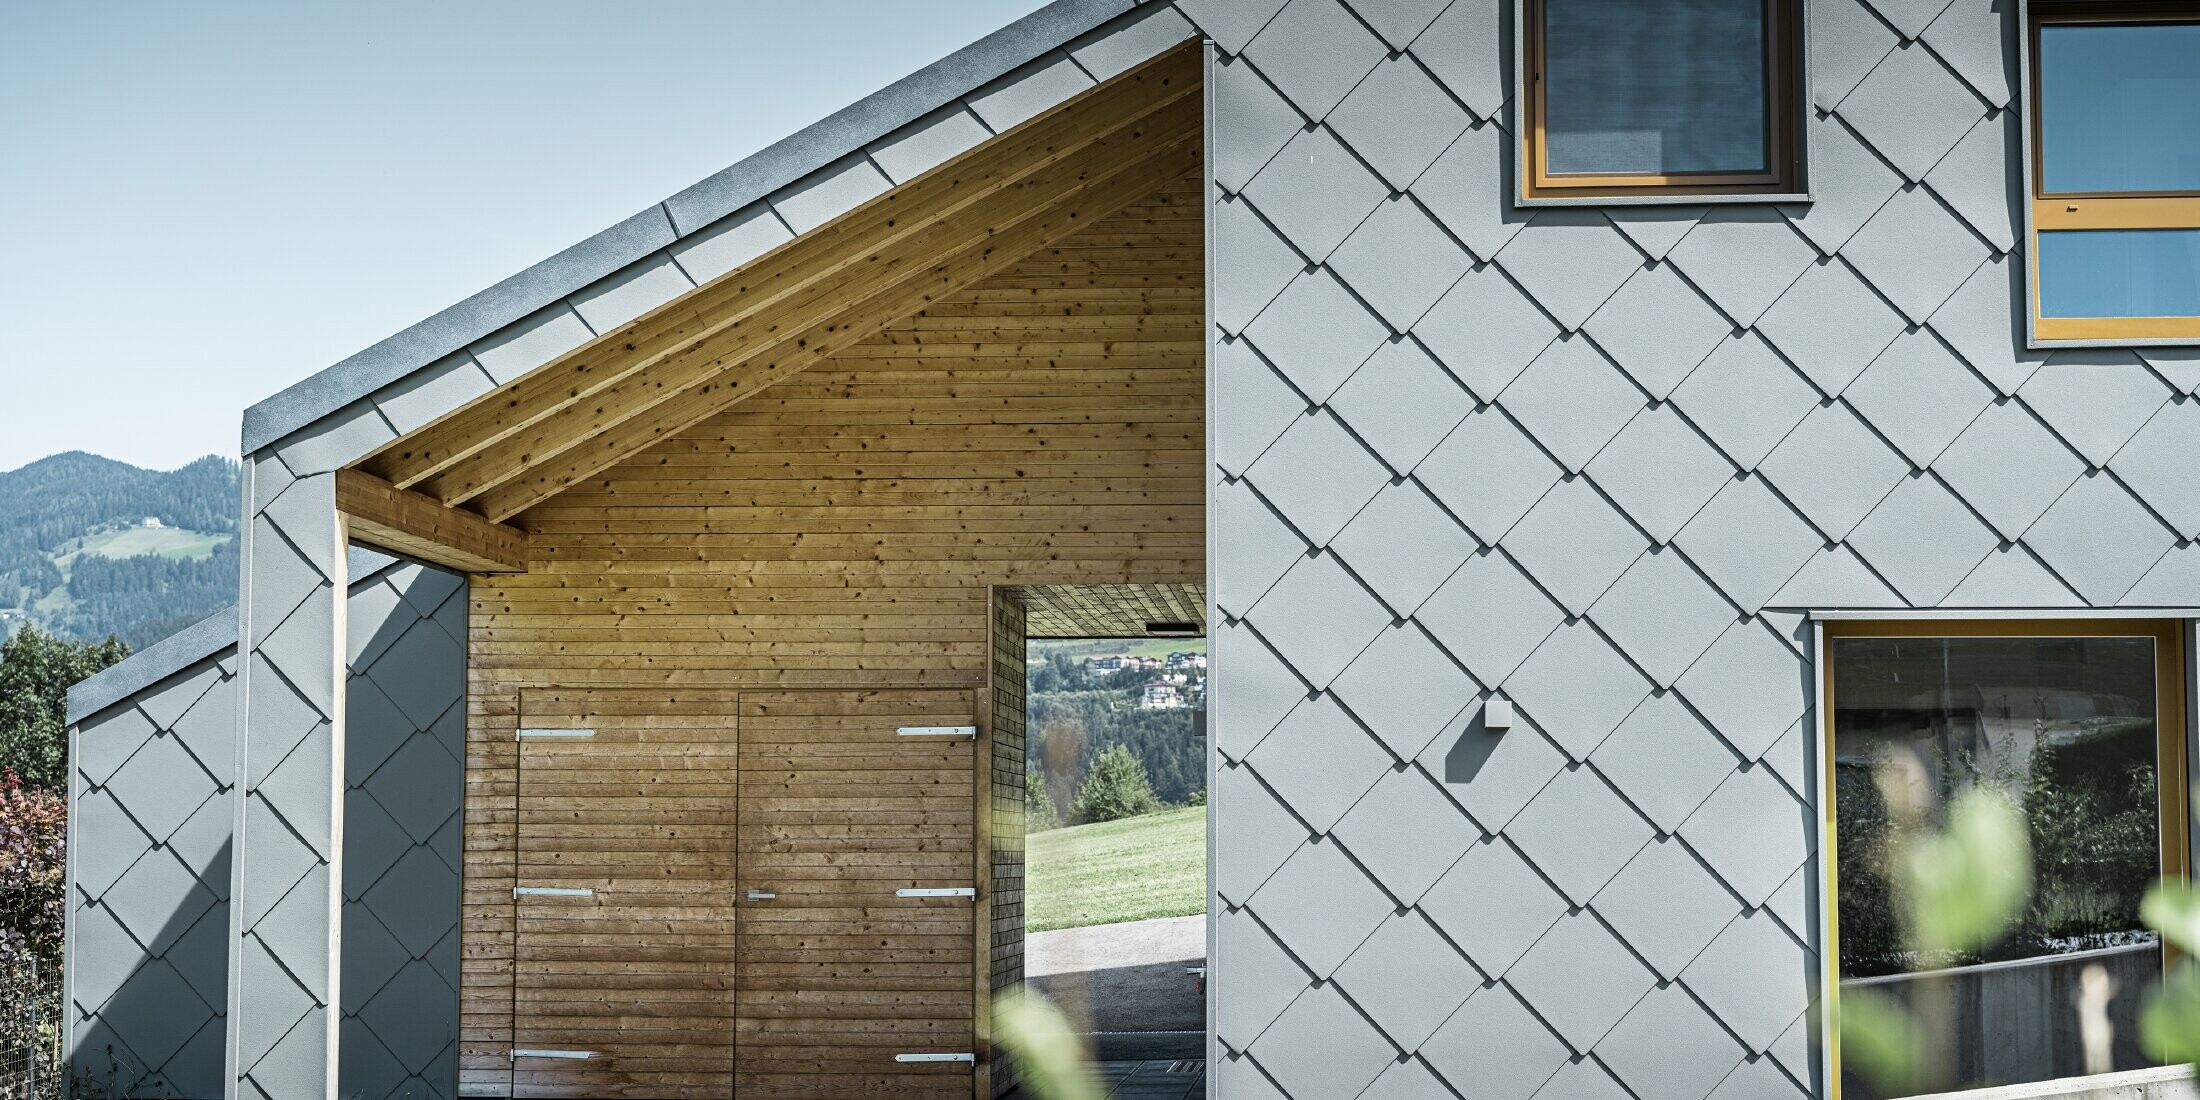 The covered entrance area is made with horizontal wood panelling, the rest of the façade is clad with the large PREFA aluminium rhomboid façade tiles in light grey